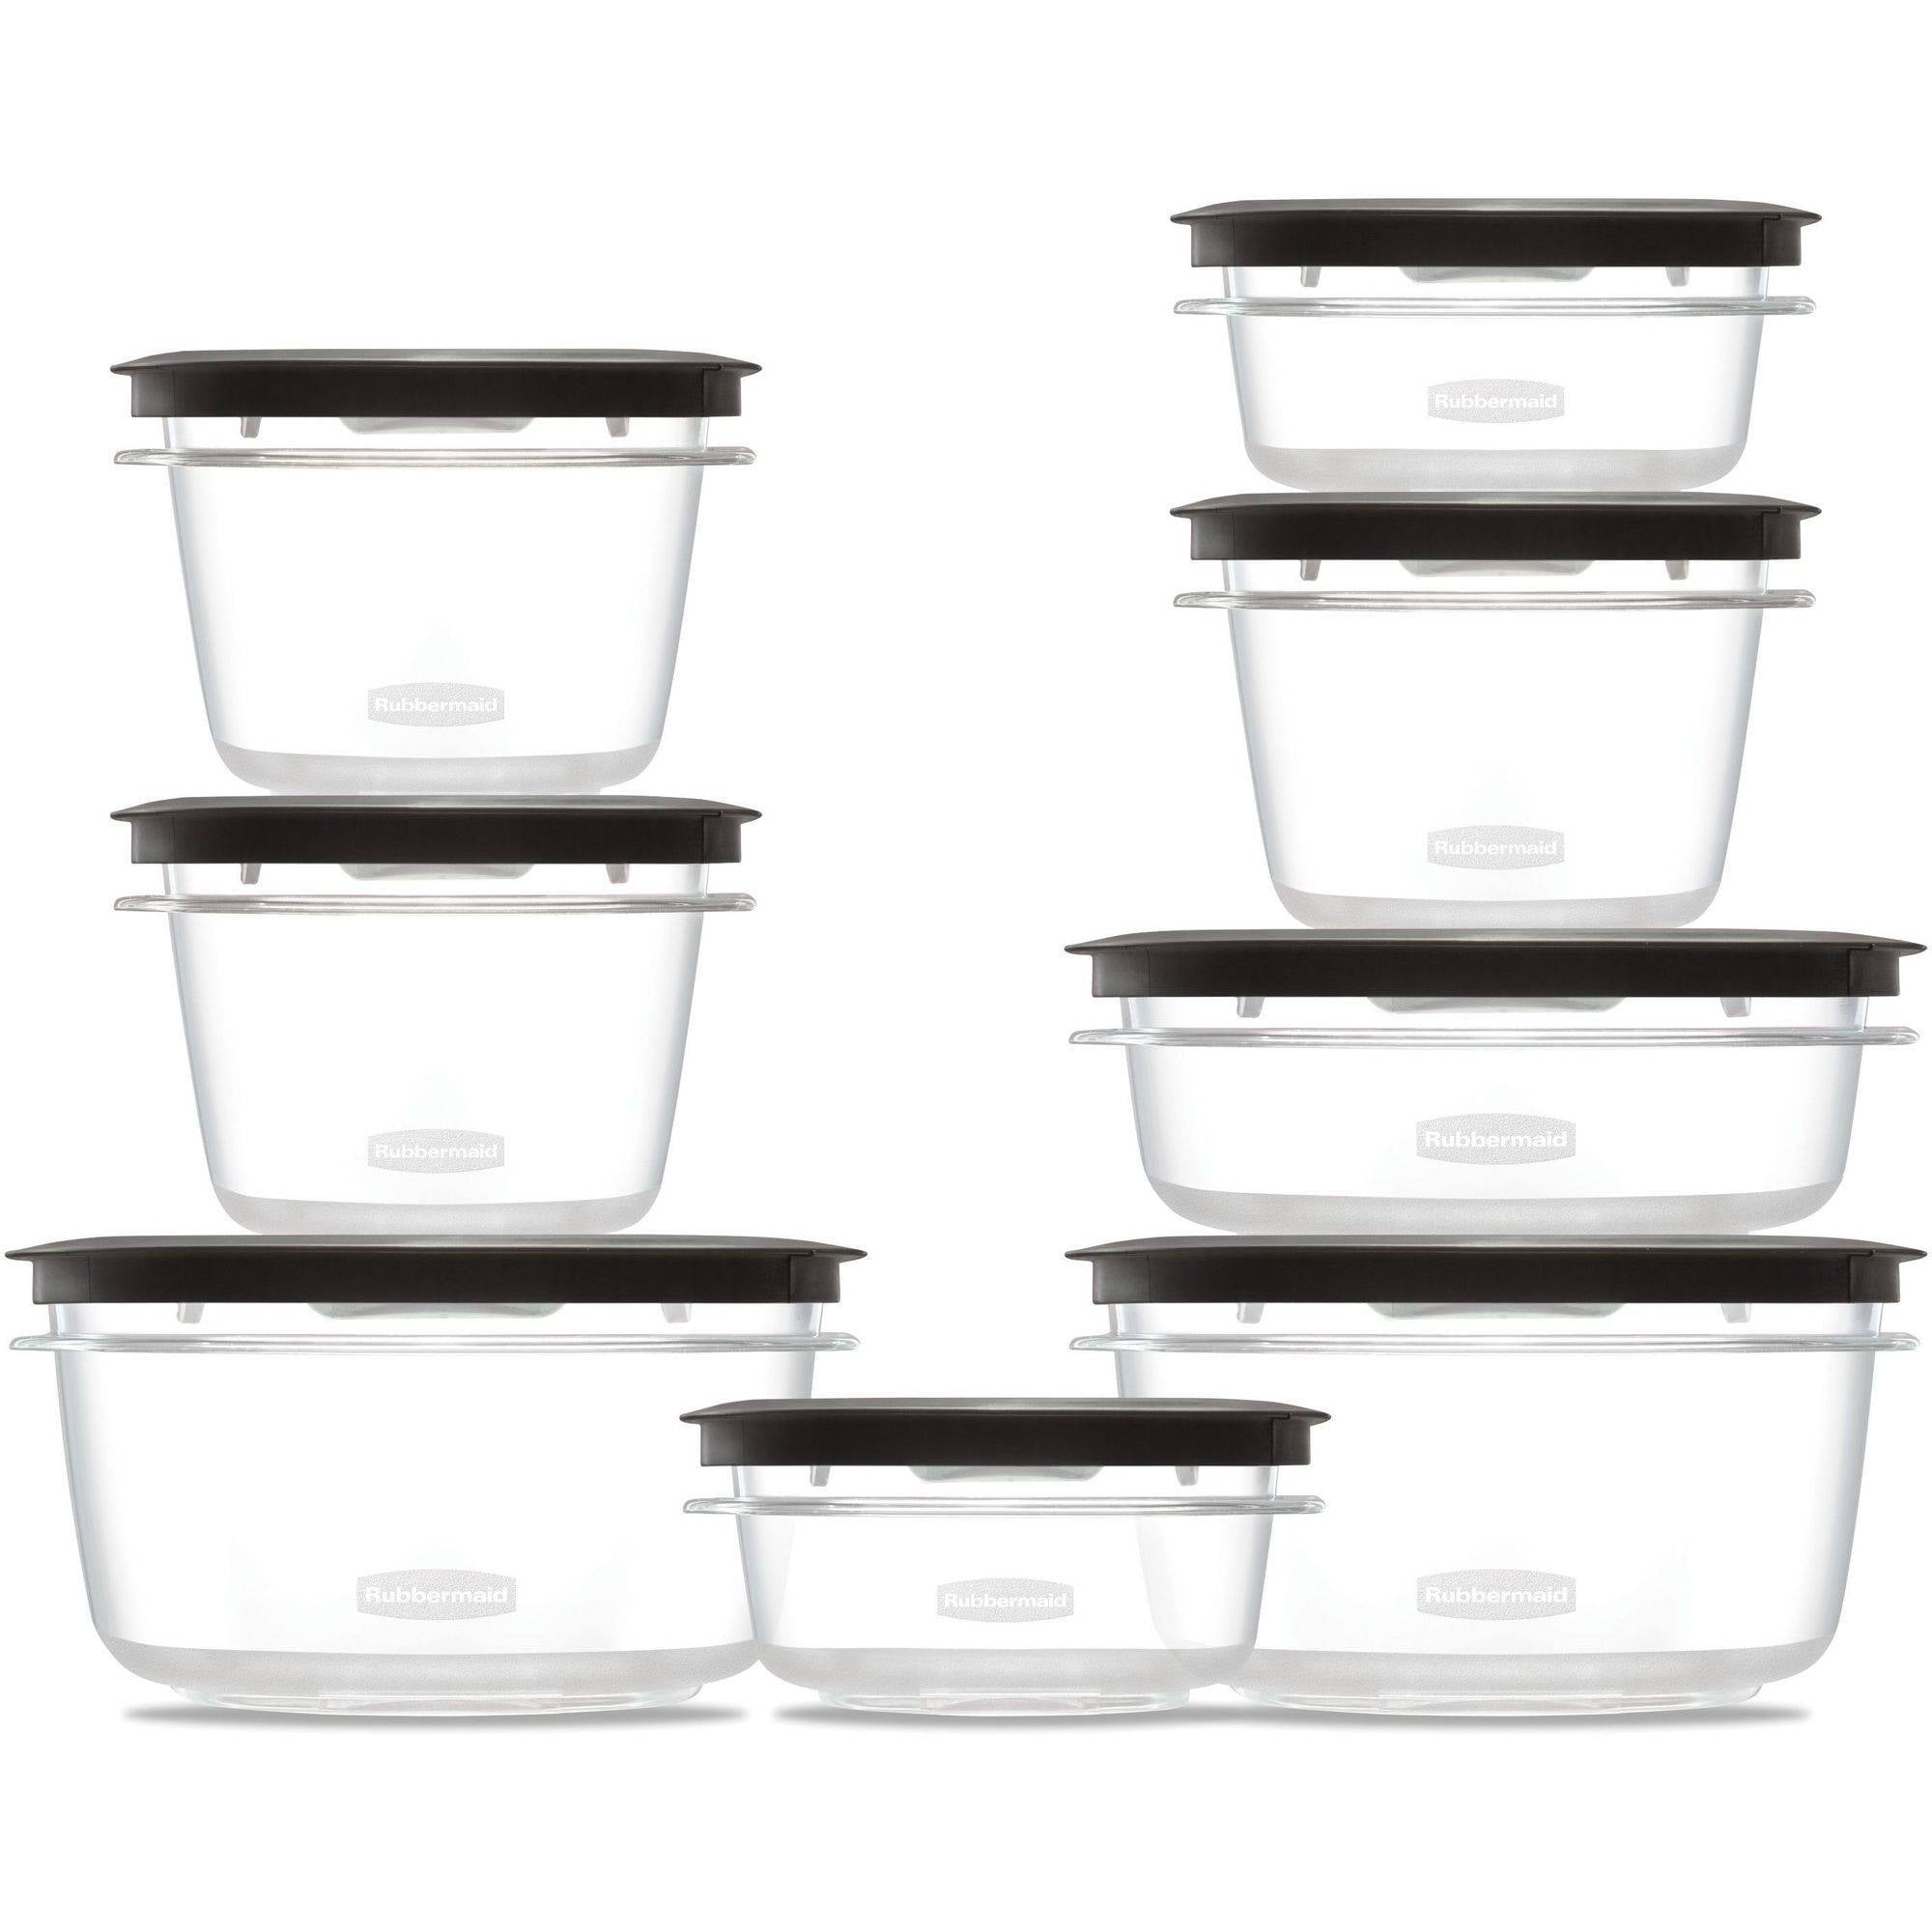 Rubbermaid® Premier Food Storage Containers